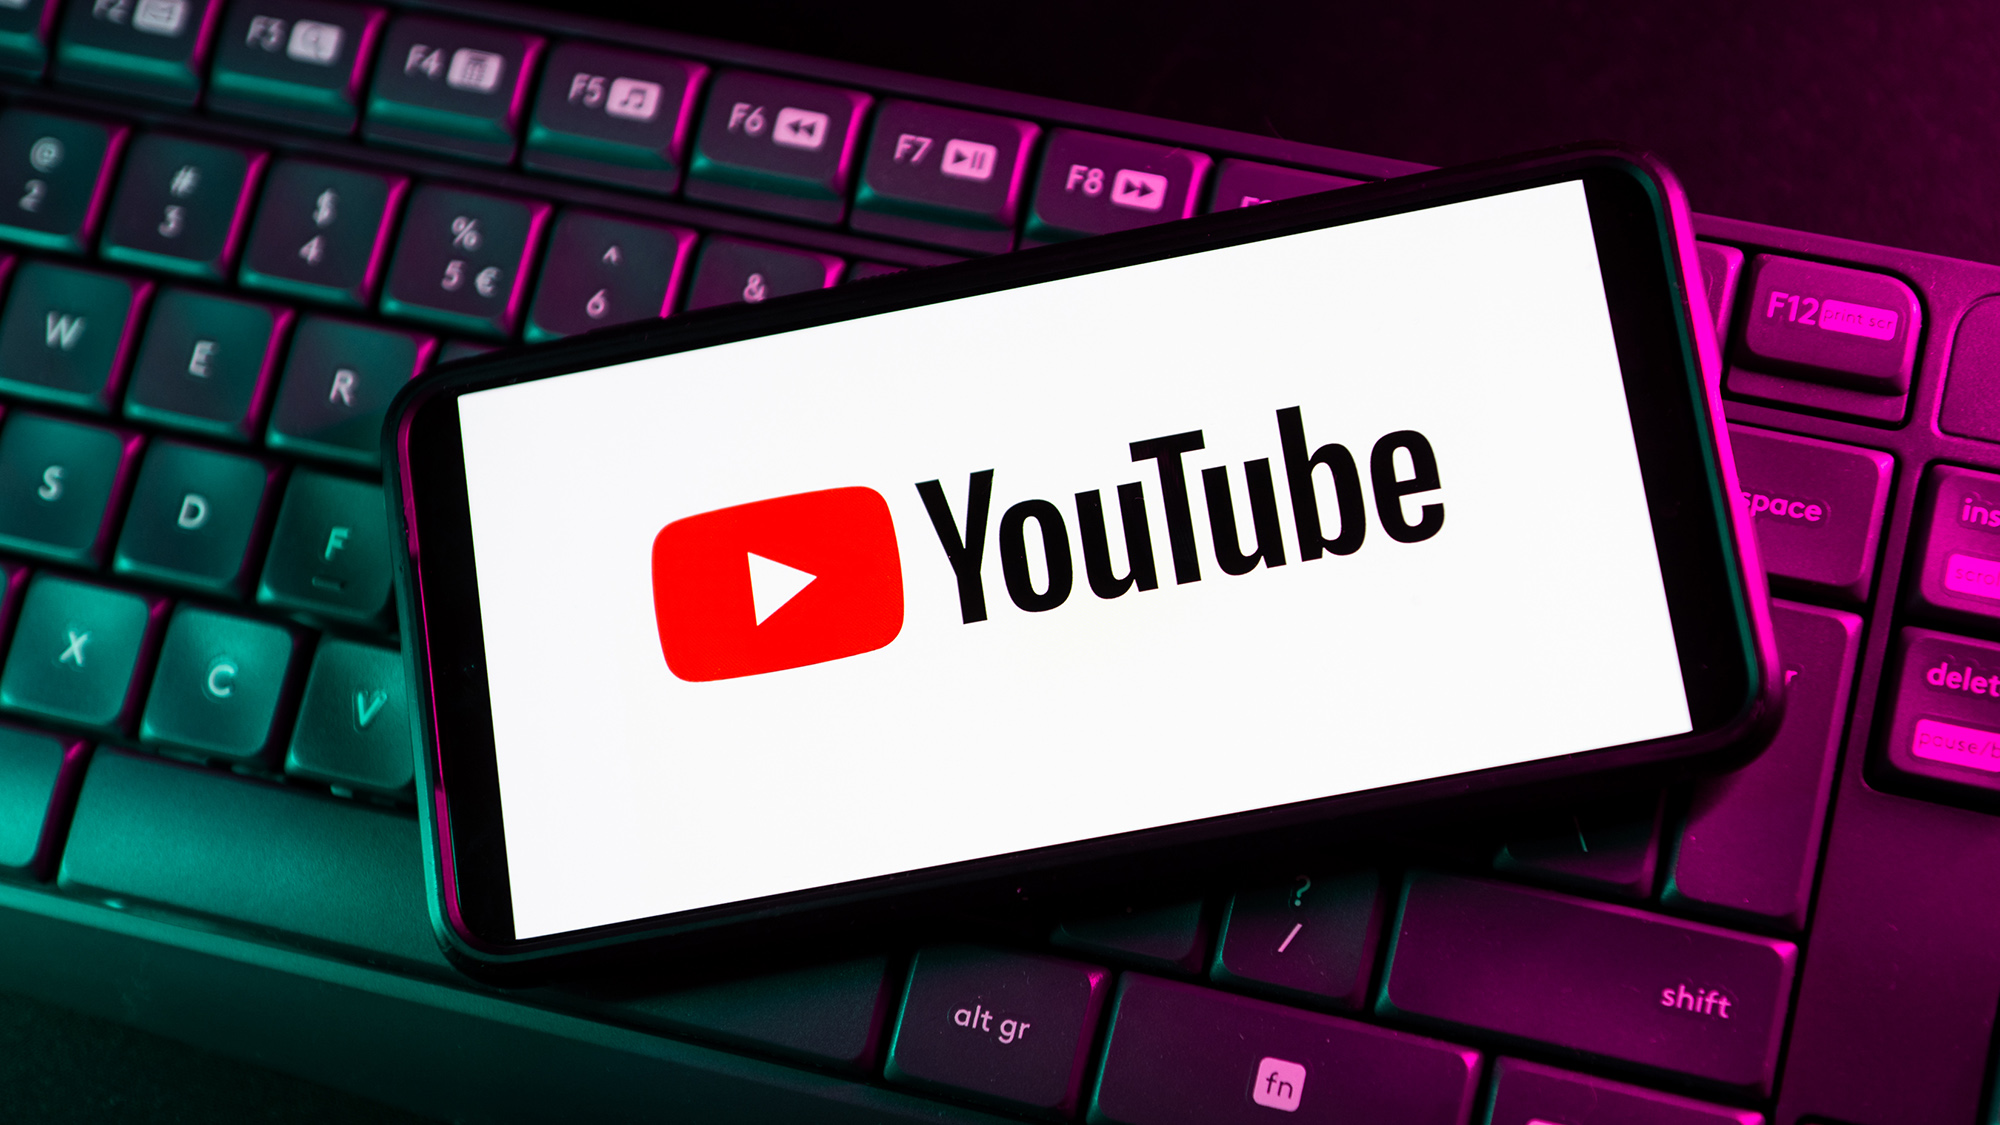 Members of YouTube Premium Can Now Try the AI-Powered “Jump Ahead” Function